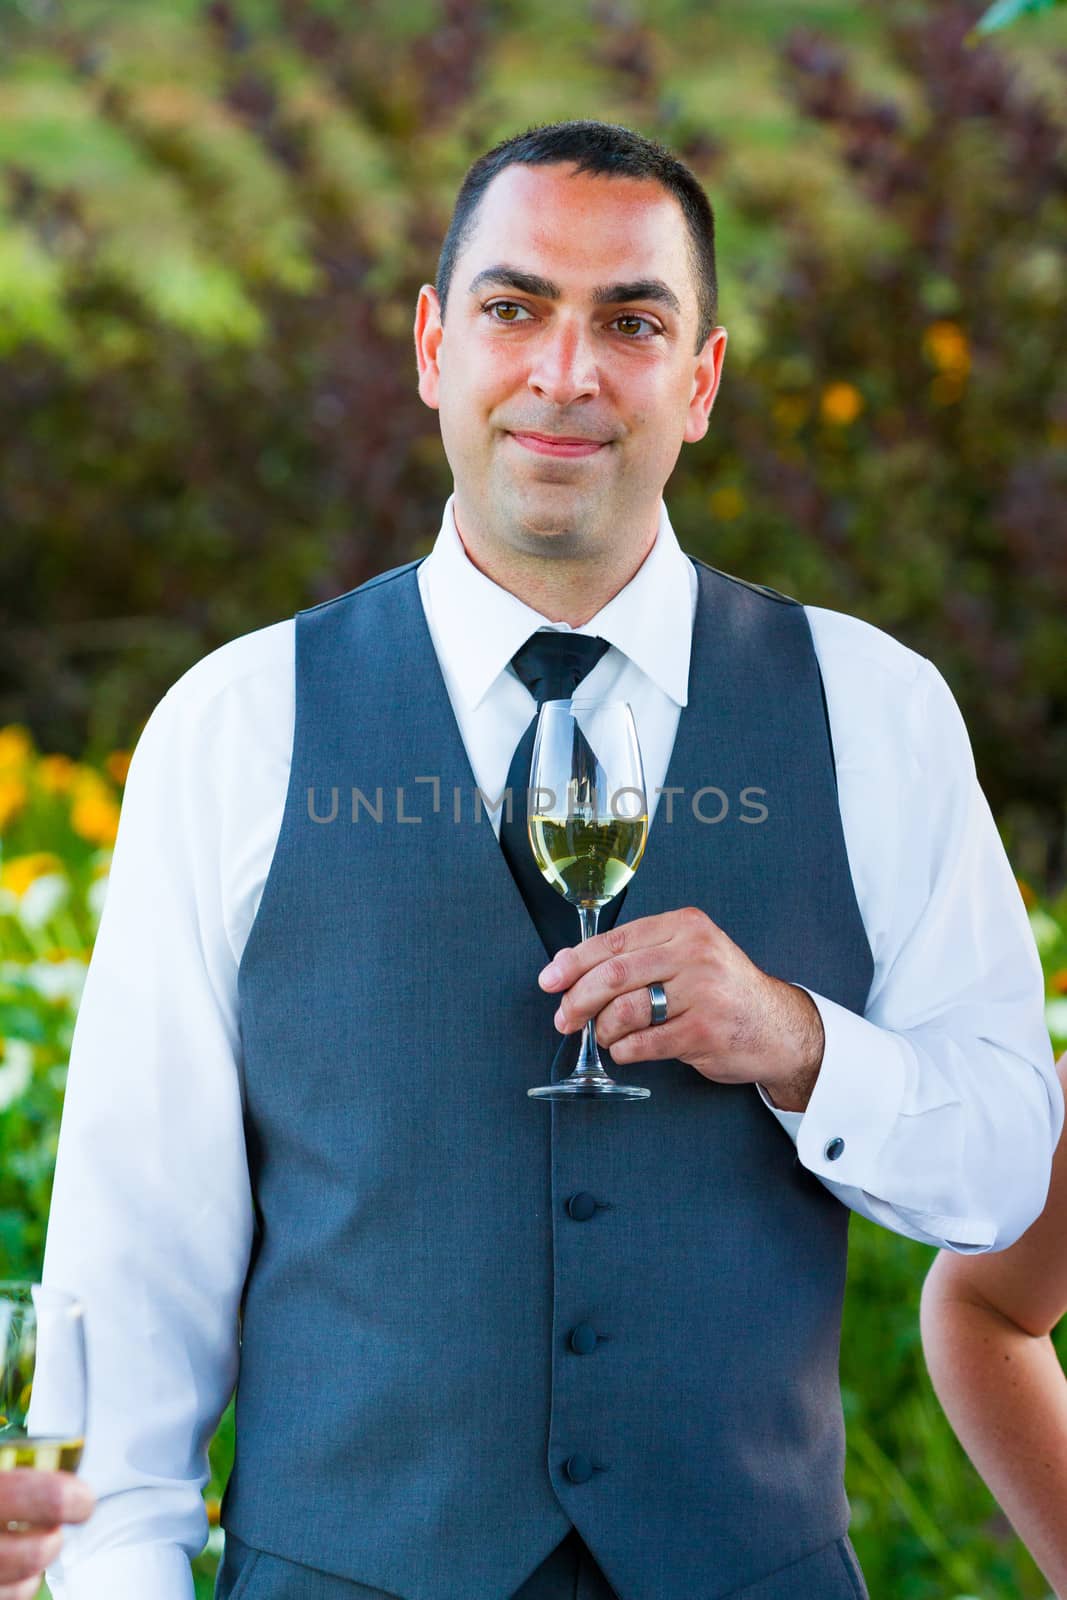 Groom During Toasts by joshuaraineyphotography